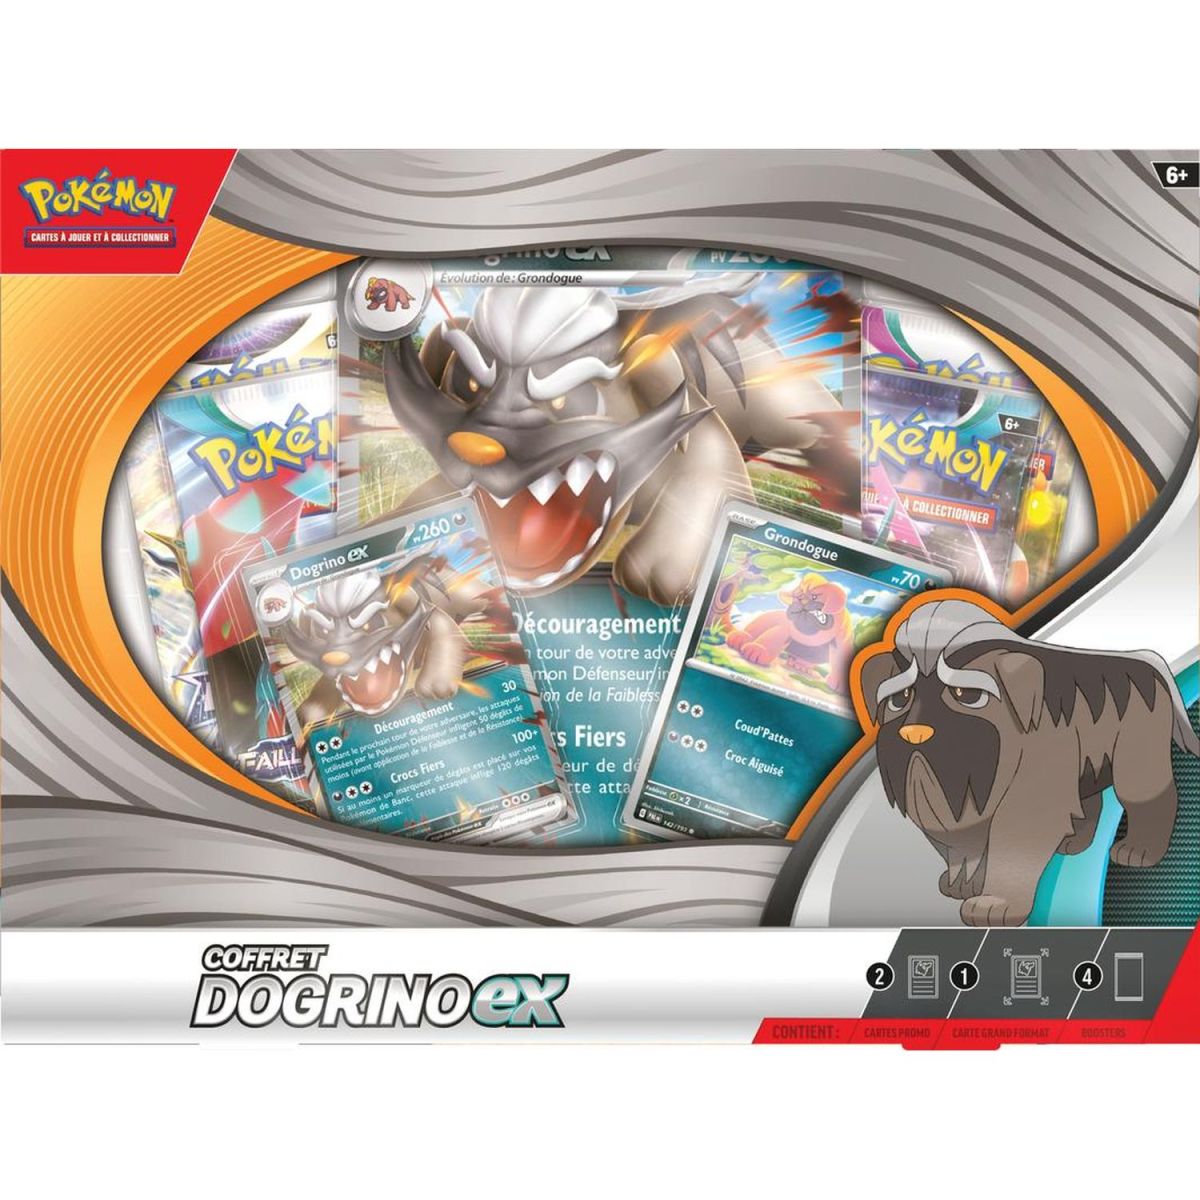 Item Pokémon - Box of 4 Boosters - Dogrino-EX - FR